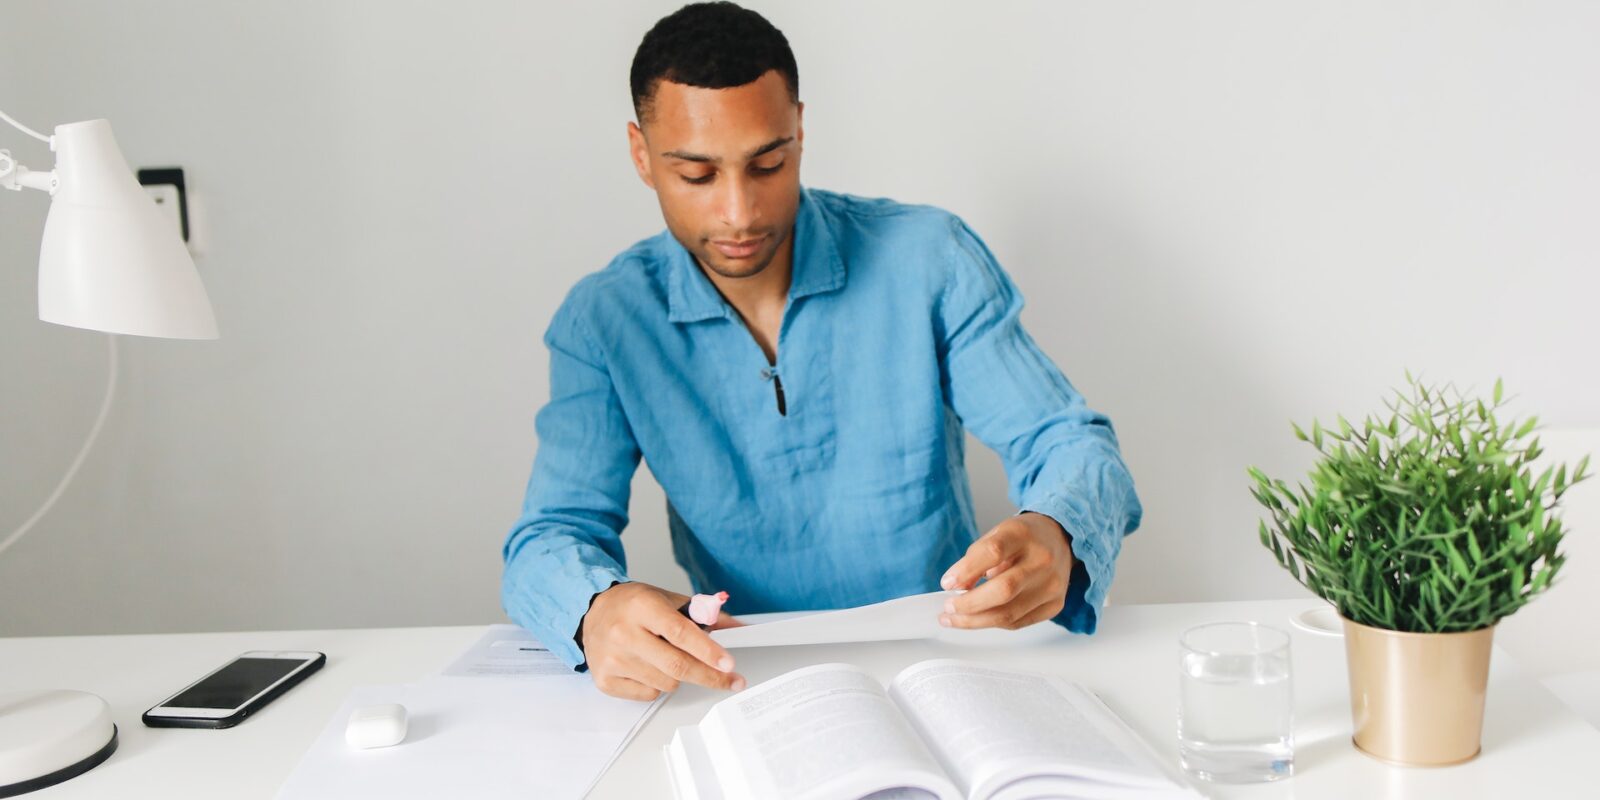 A man sitting at a white desk looking at a piece of paper with an open book in front of him.